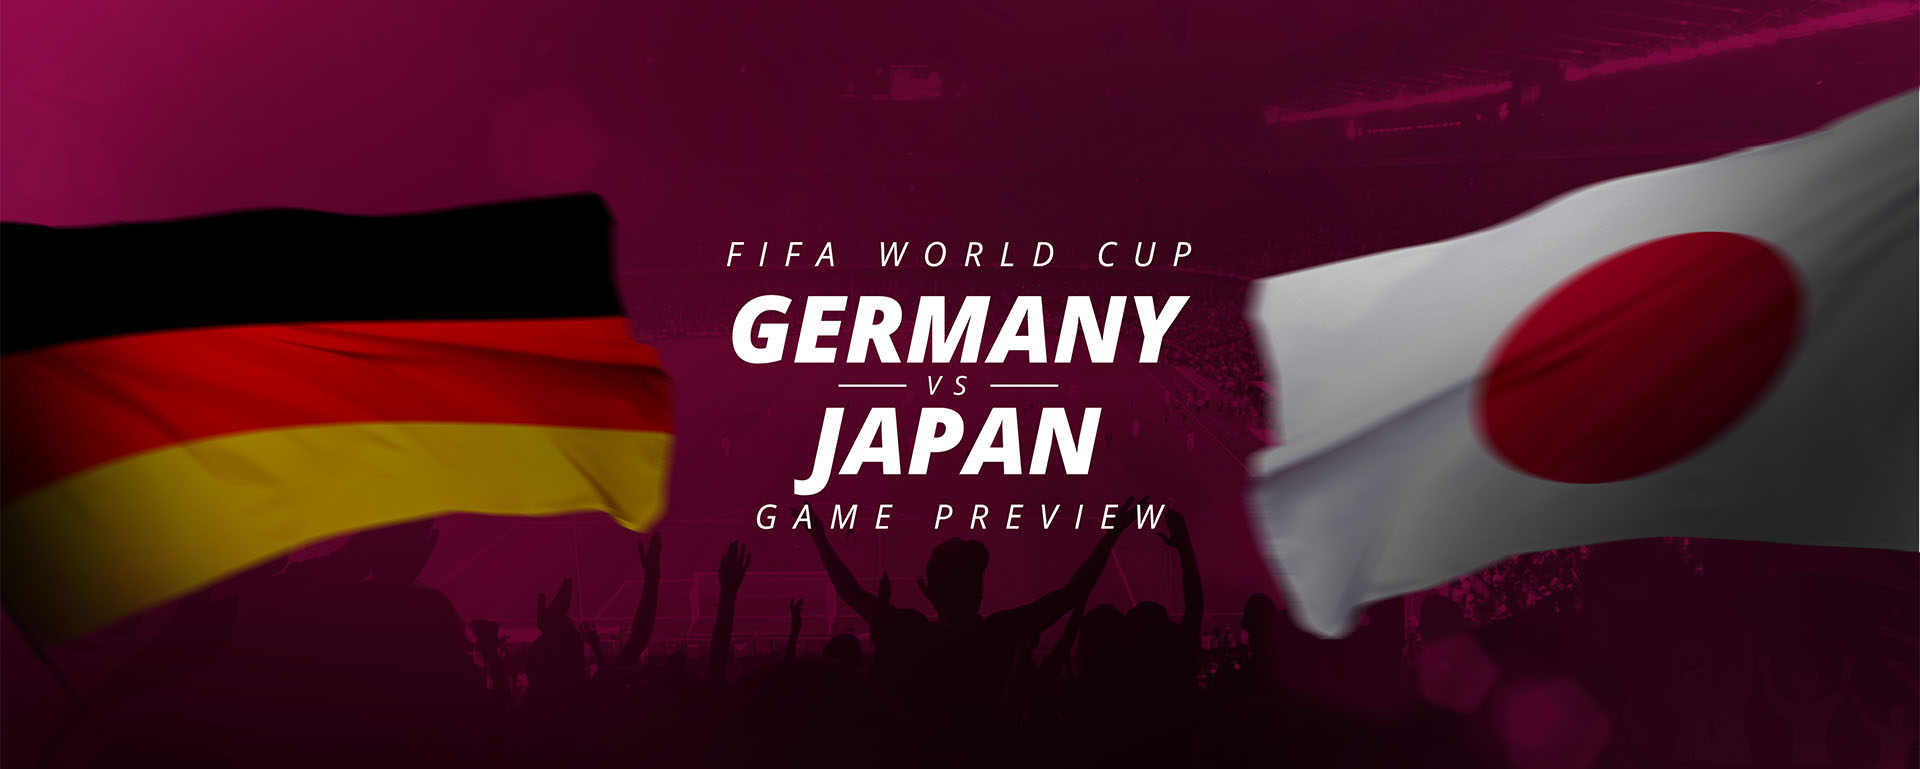 FIFA WORLD CUP: GERMANY VS JAPAN – GAME PREVIEW